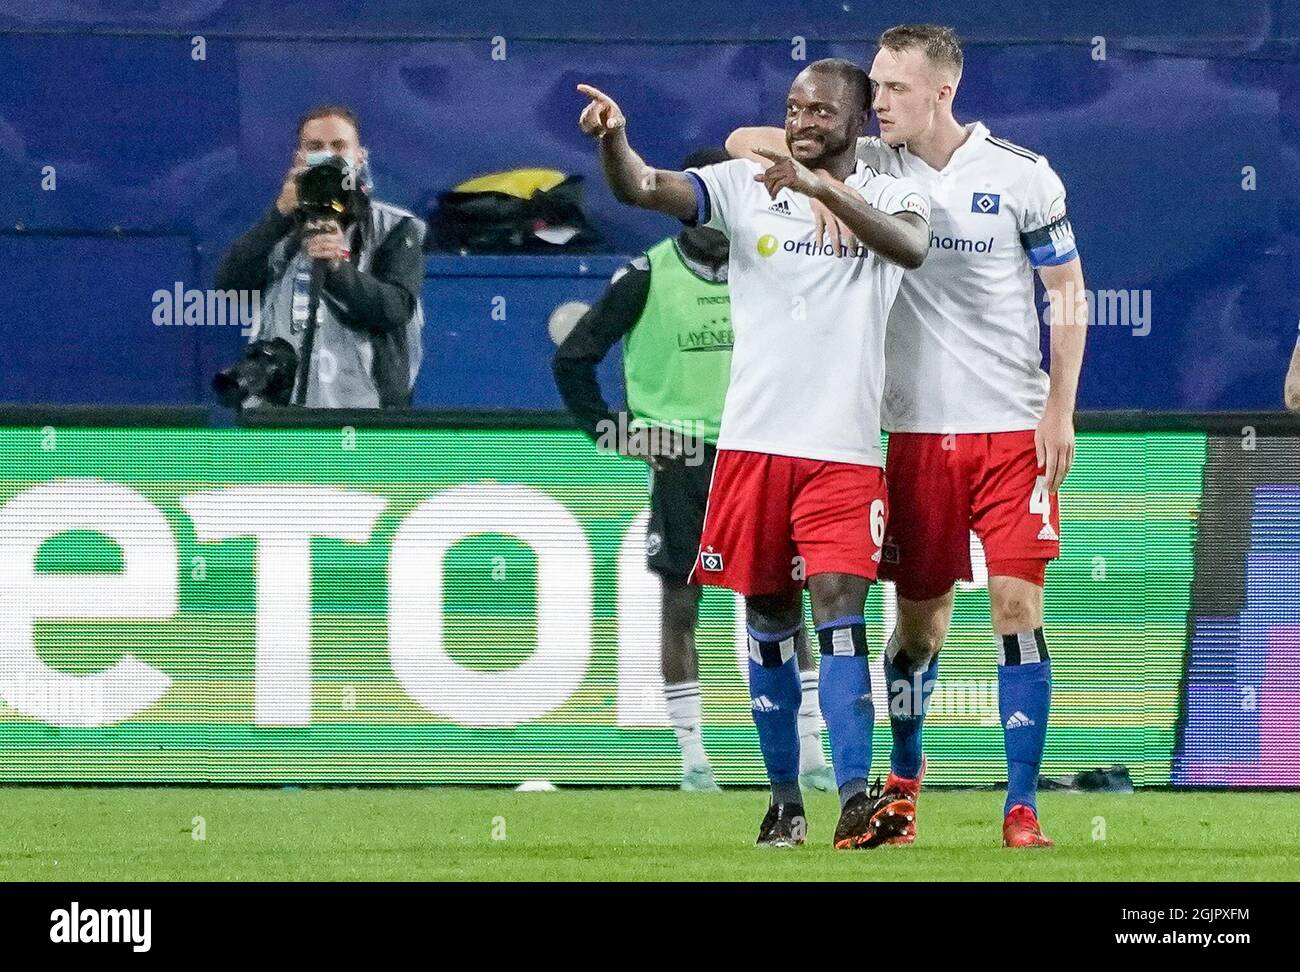 Hamburg, Germany. 11th Sep, 2021. Football: 2. Bundesliga, Hamburger SV - SV Sandhausen, Matchday 6, at Volksparkstadion. Hamburg's David Kinsombi (l) celebrates his goal for 1:0 with Hamburg's Sebastian Schonlau. Credit: Axel Heimken/dpa - IMPORTANT NOTE: In accordance with the regulations of the DFL Deutsche Fußball Liga and/or the DFB Deutscher Fußball-Bund, it is prohibited to use or have used photographs taken in the stadium and/or of the match in the form of sequence pictures and/or video-like photo series./dpa/Alamy Live News Stock Photo